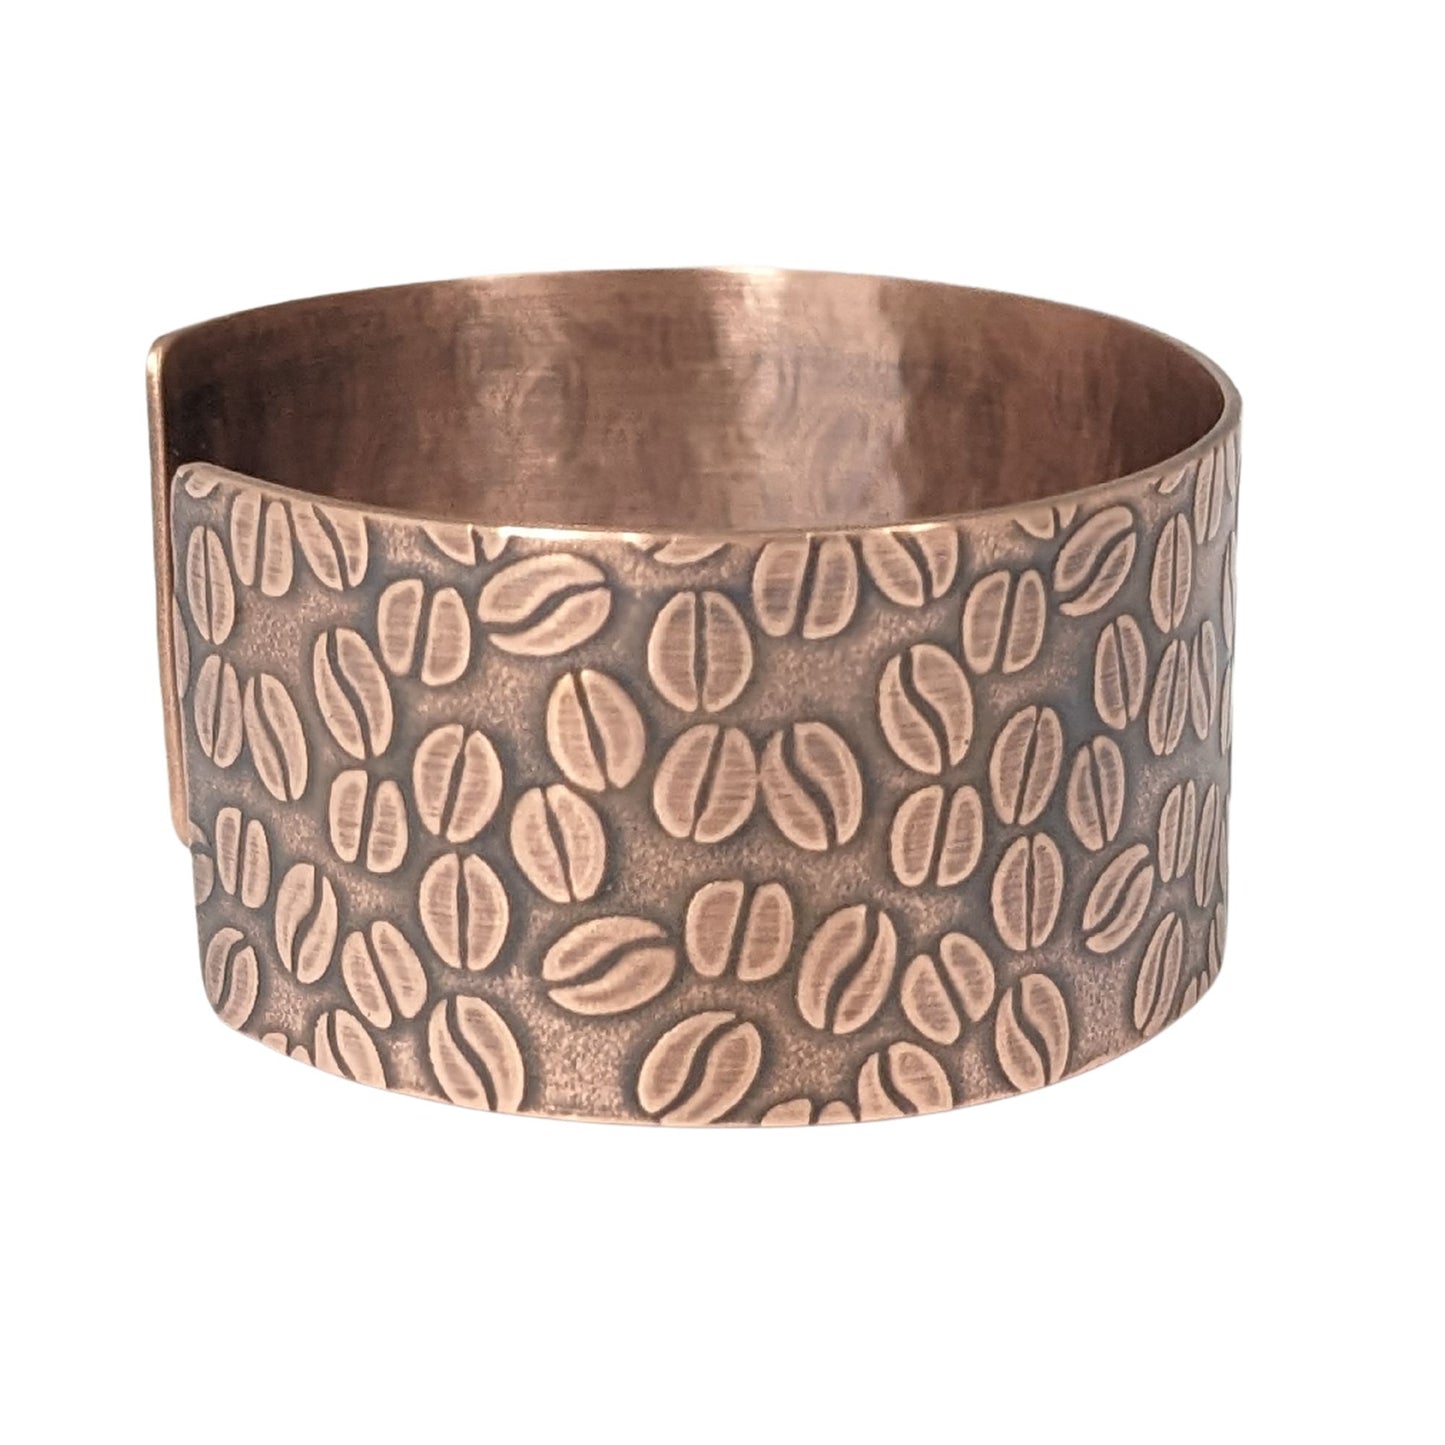 Copper cuff bracelet covered with impressed design of coffee beans.